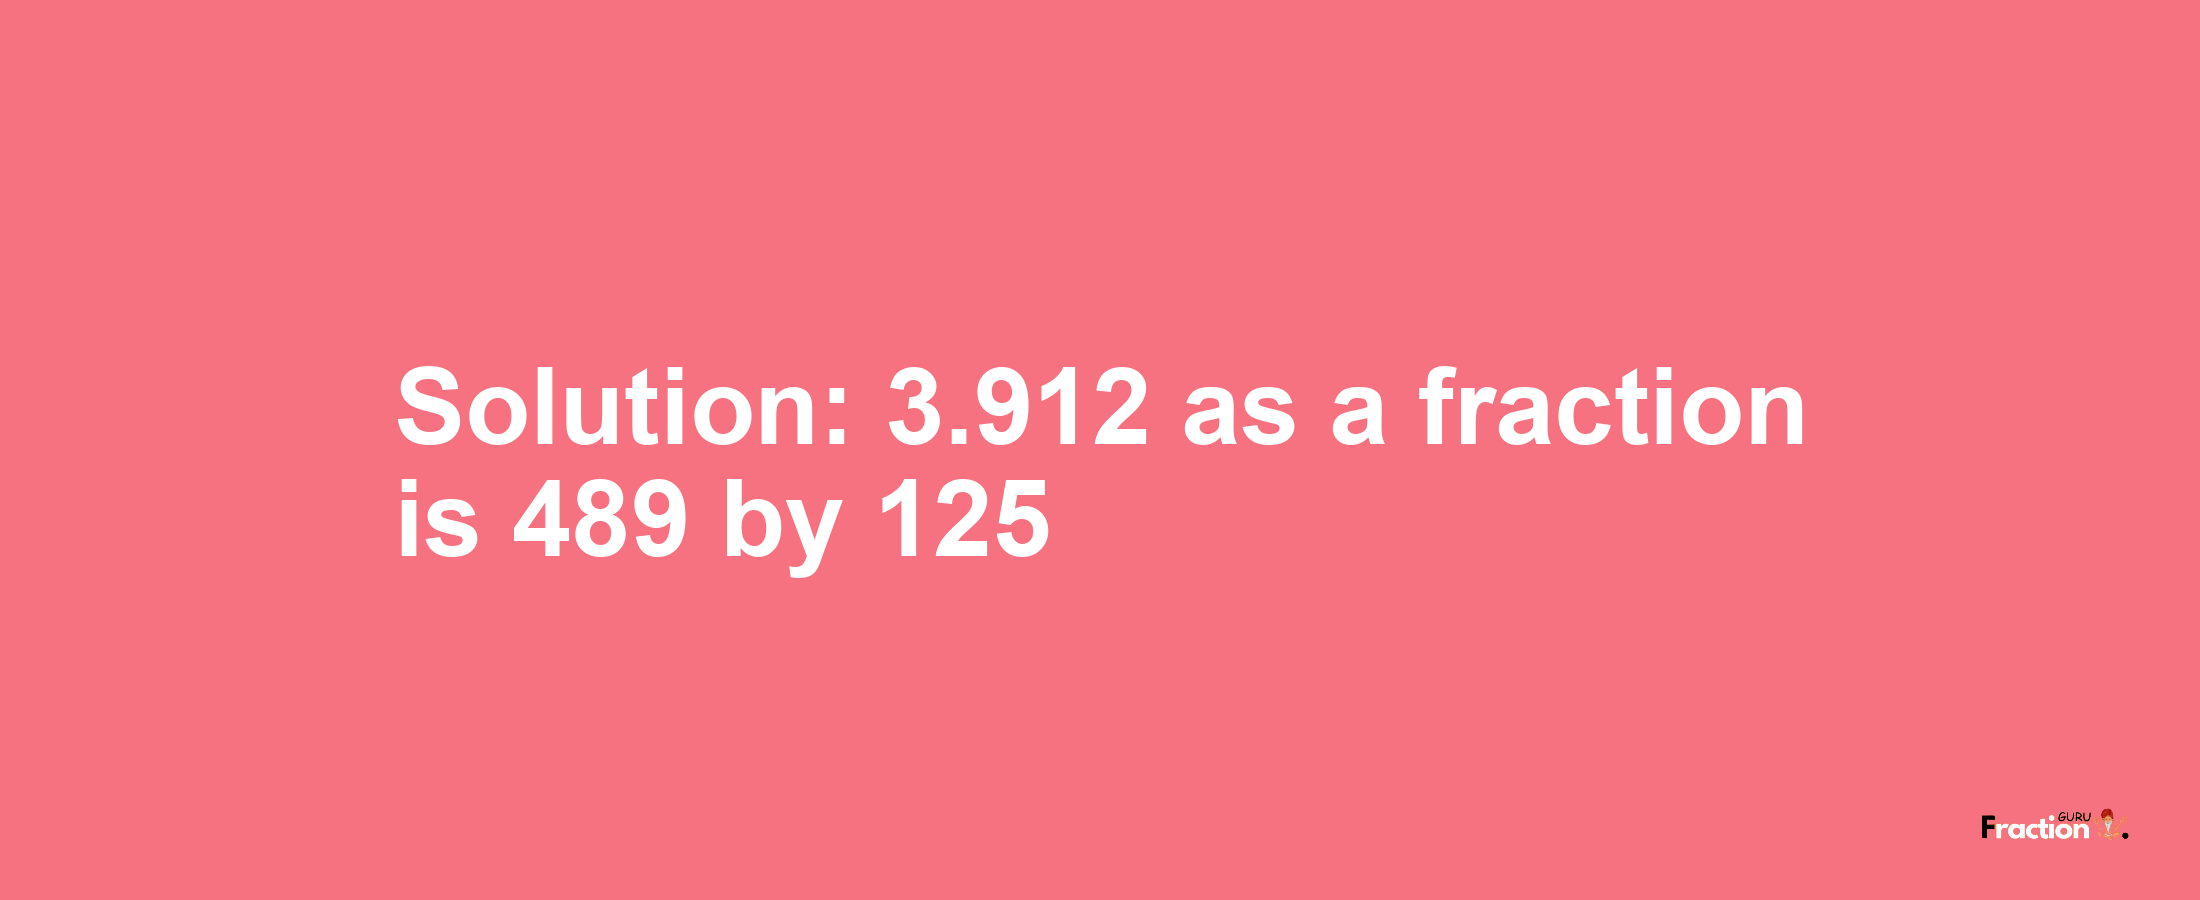 Solution:3.912 as a fraction is 489/125